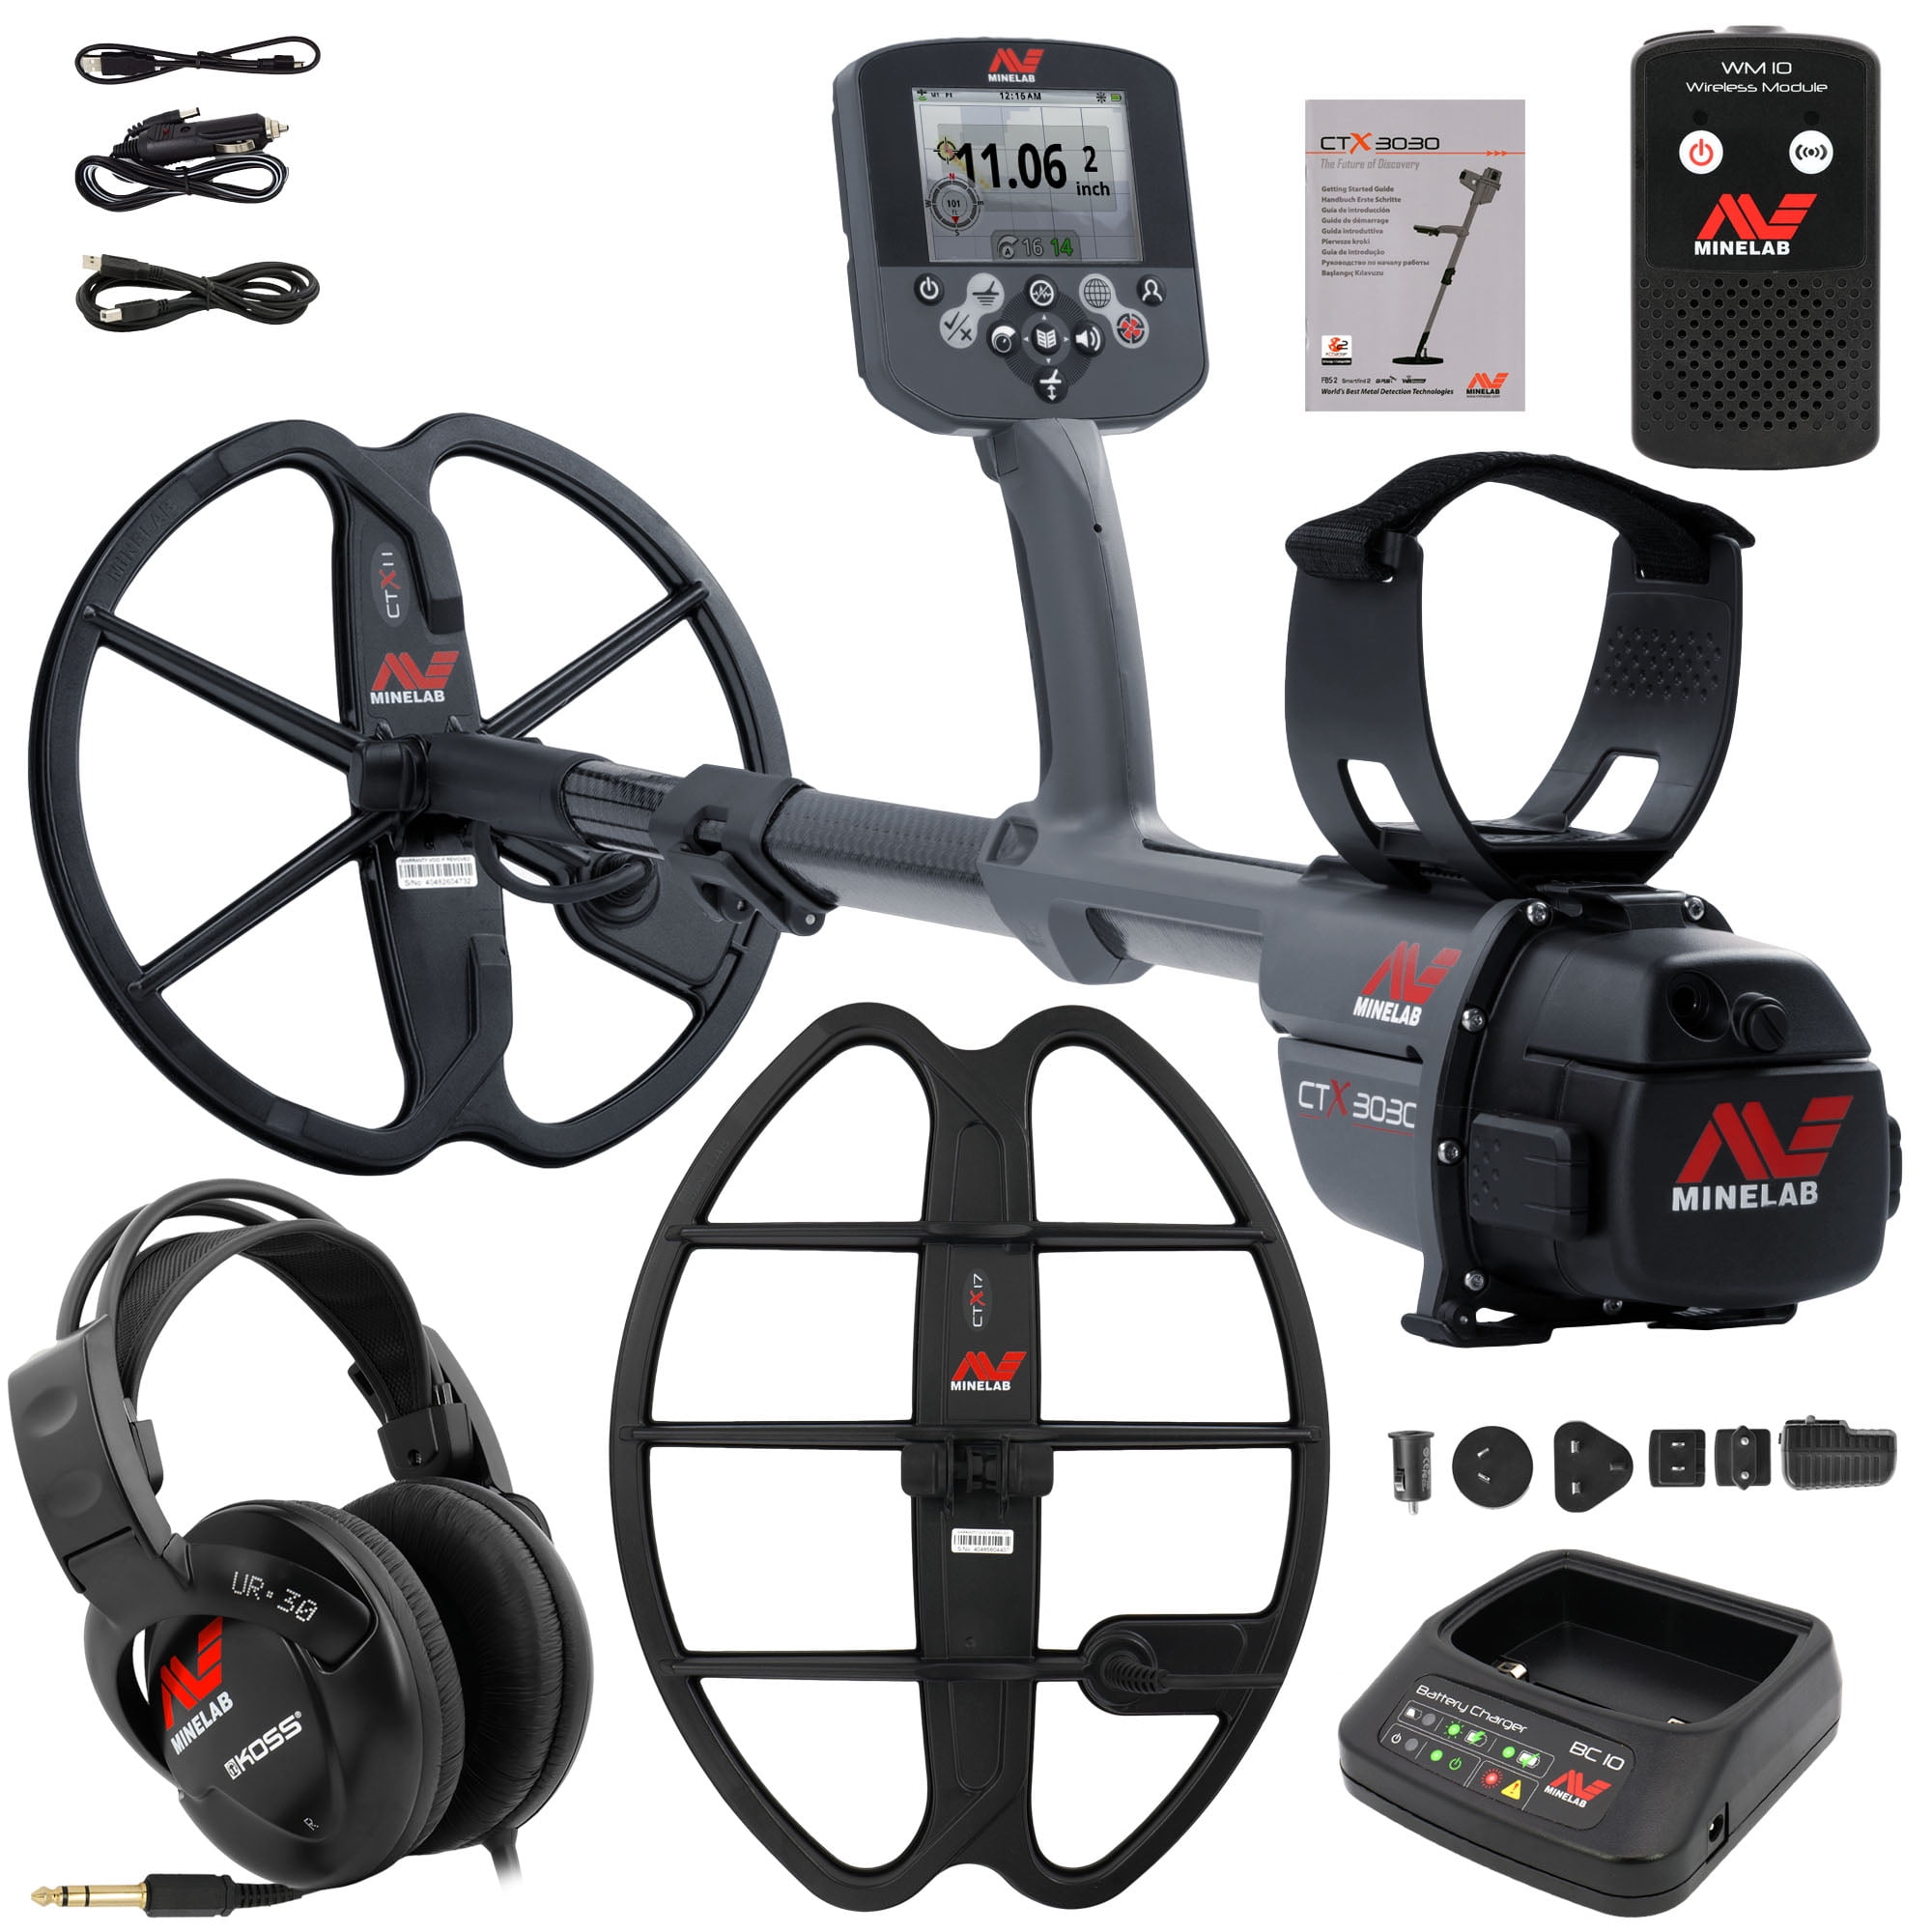 Minelab GPX 5000 Metal Detector Special with PRO-SONIC Wireless 